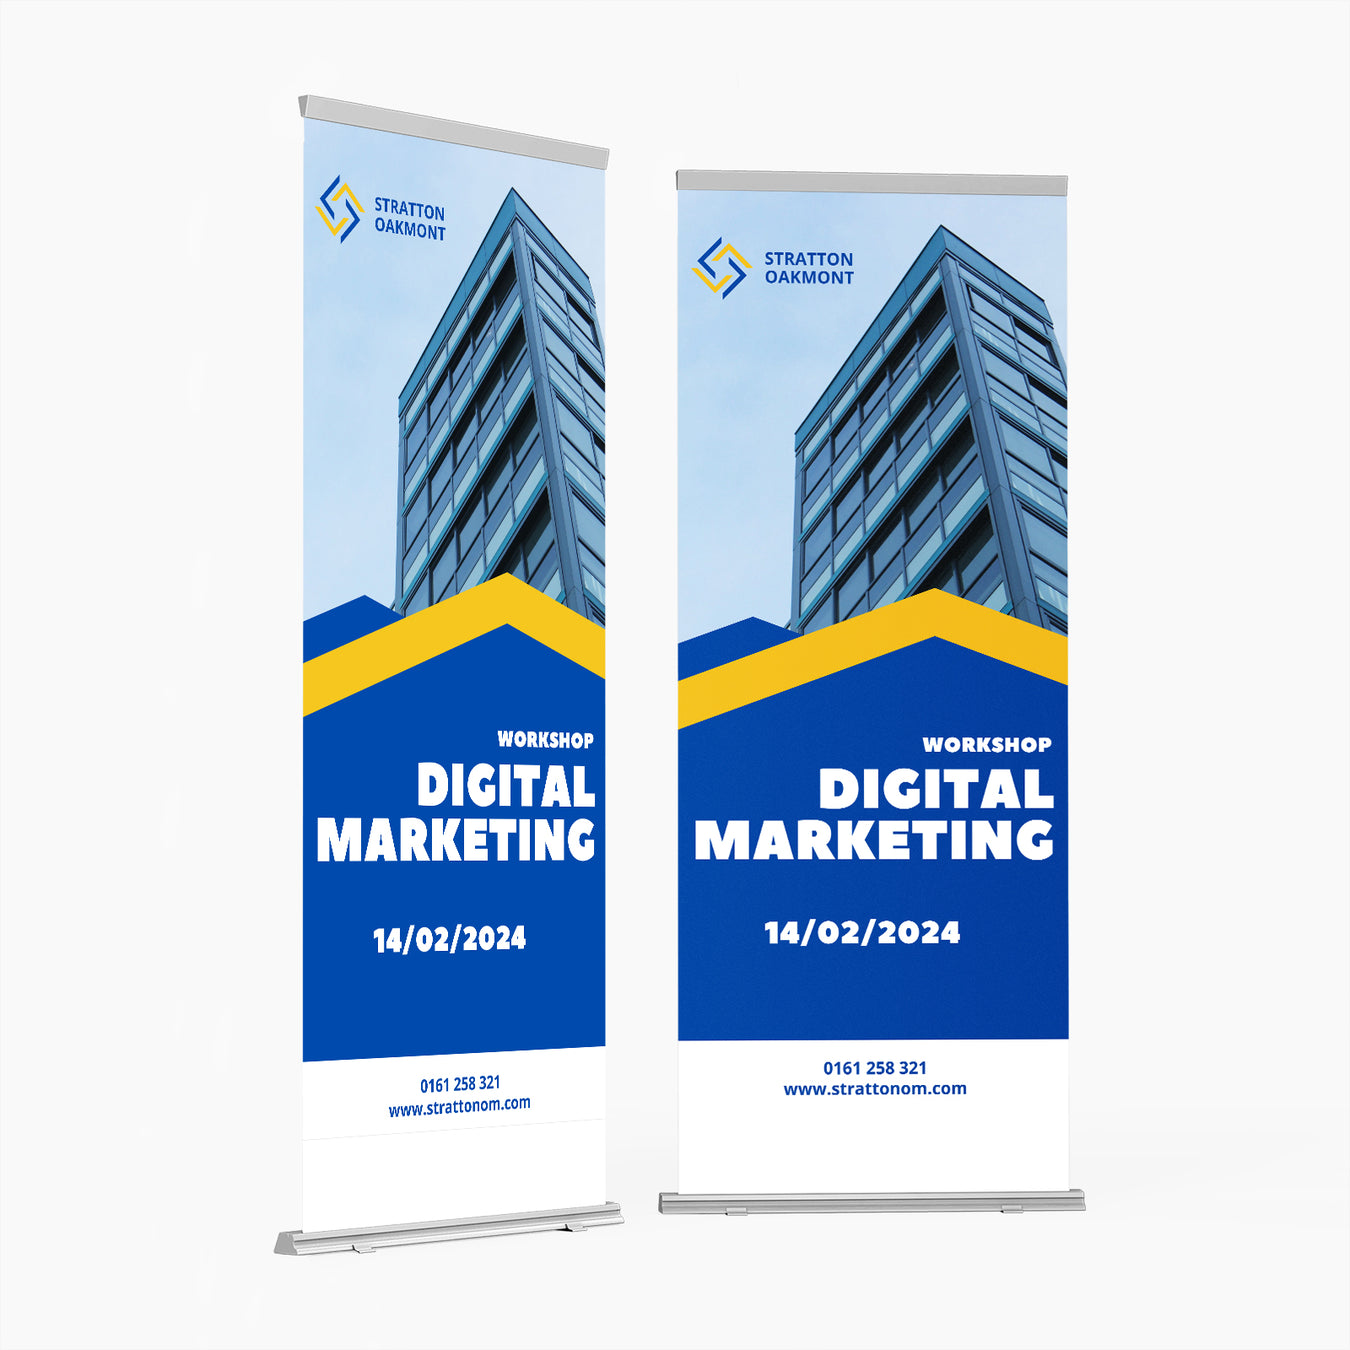 Roller Banners - All The Merchandise